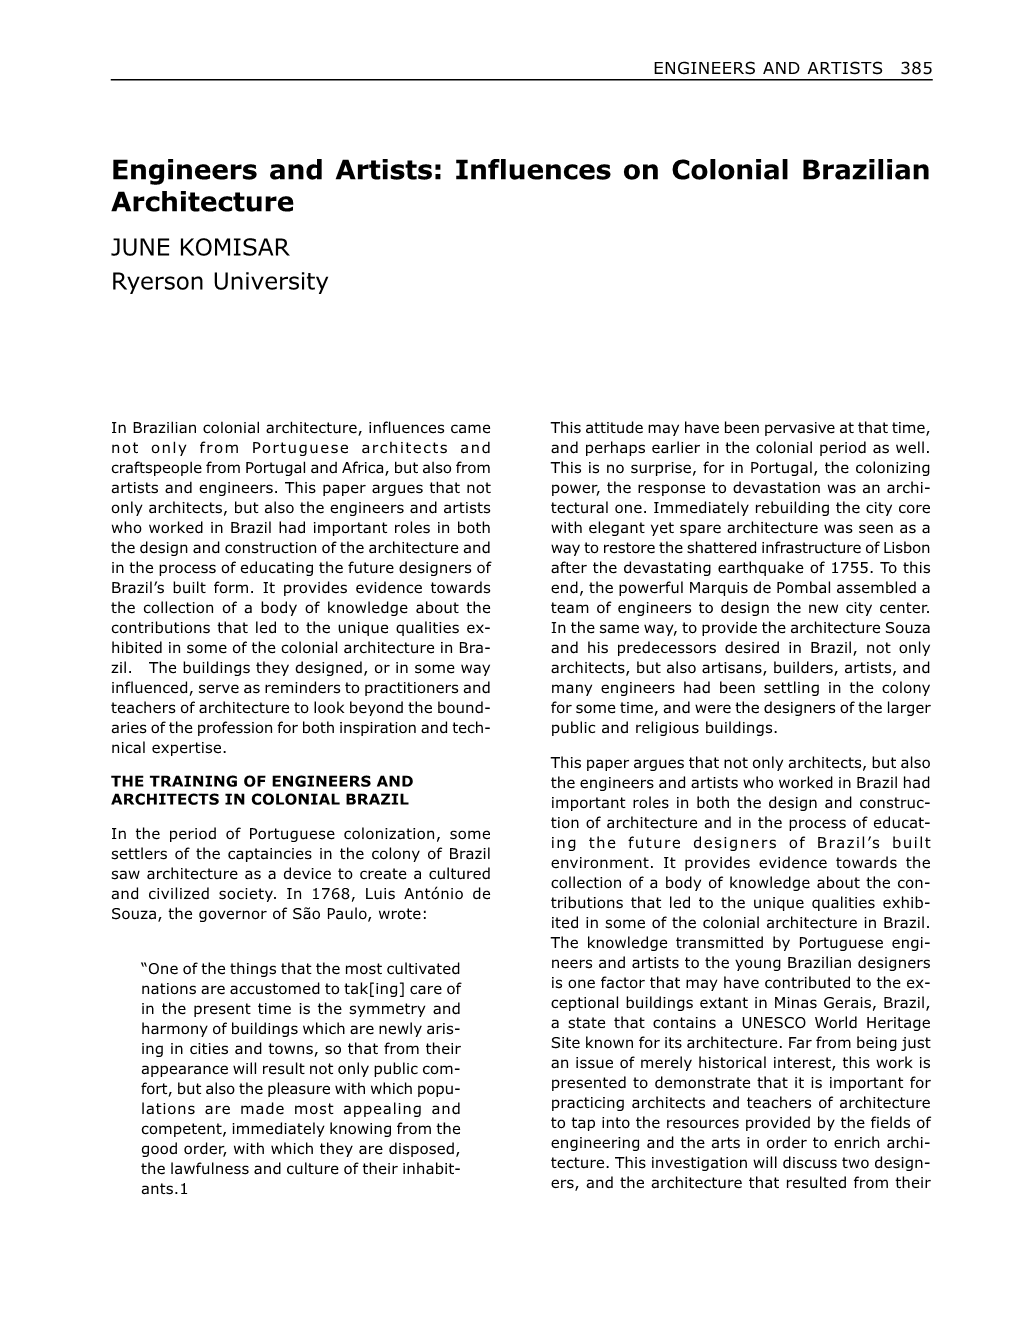 Engineers and Artists: Influences on Colonial Brazilian Architecture JUNE KOMISAR Ryerson University